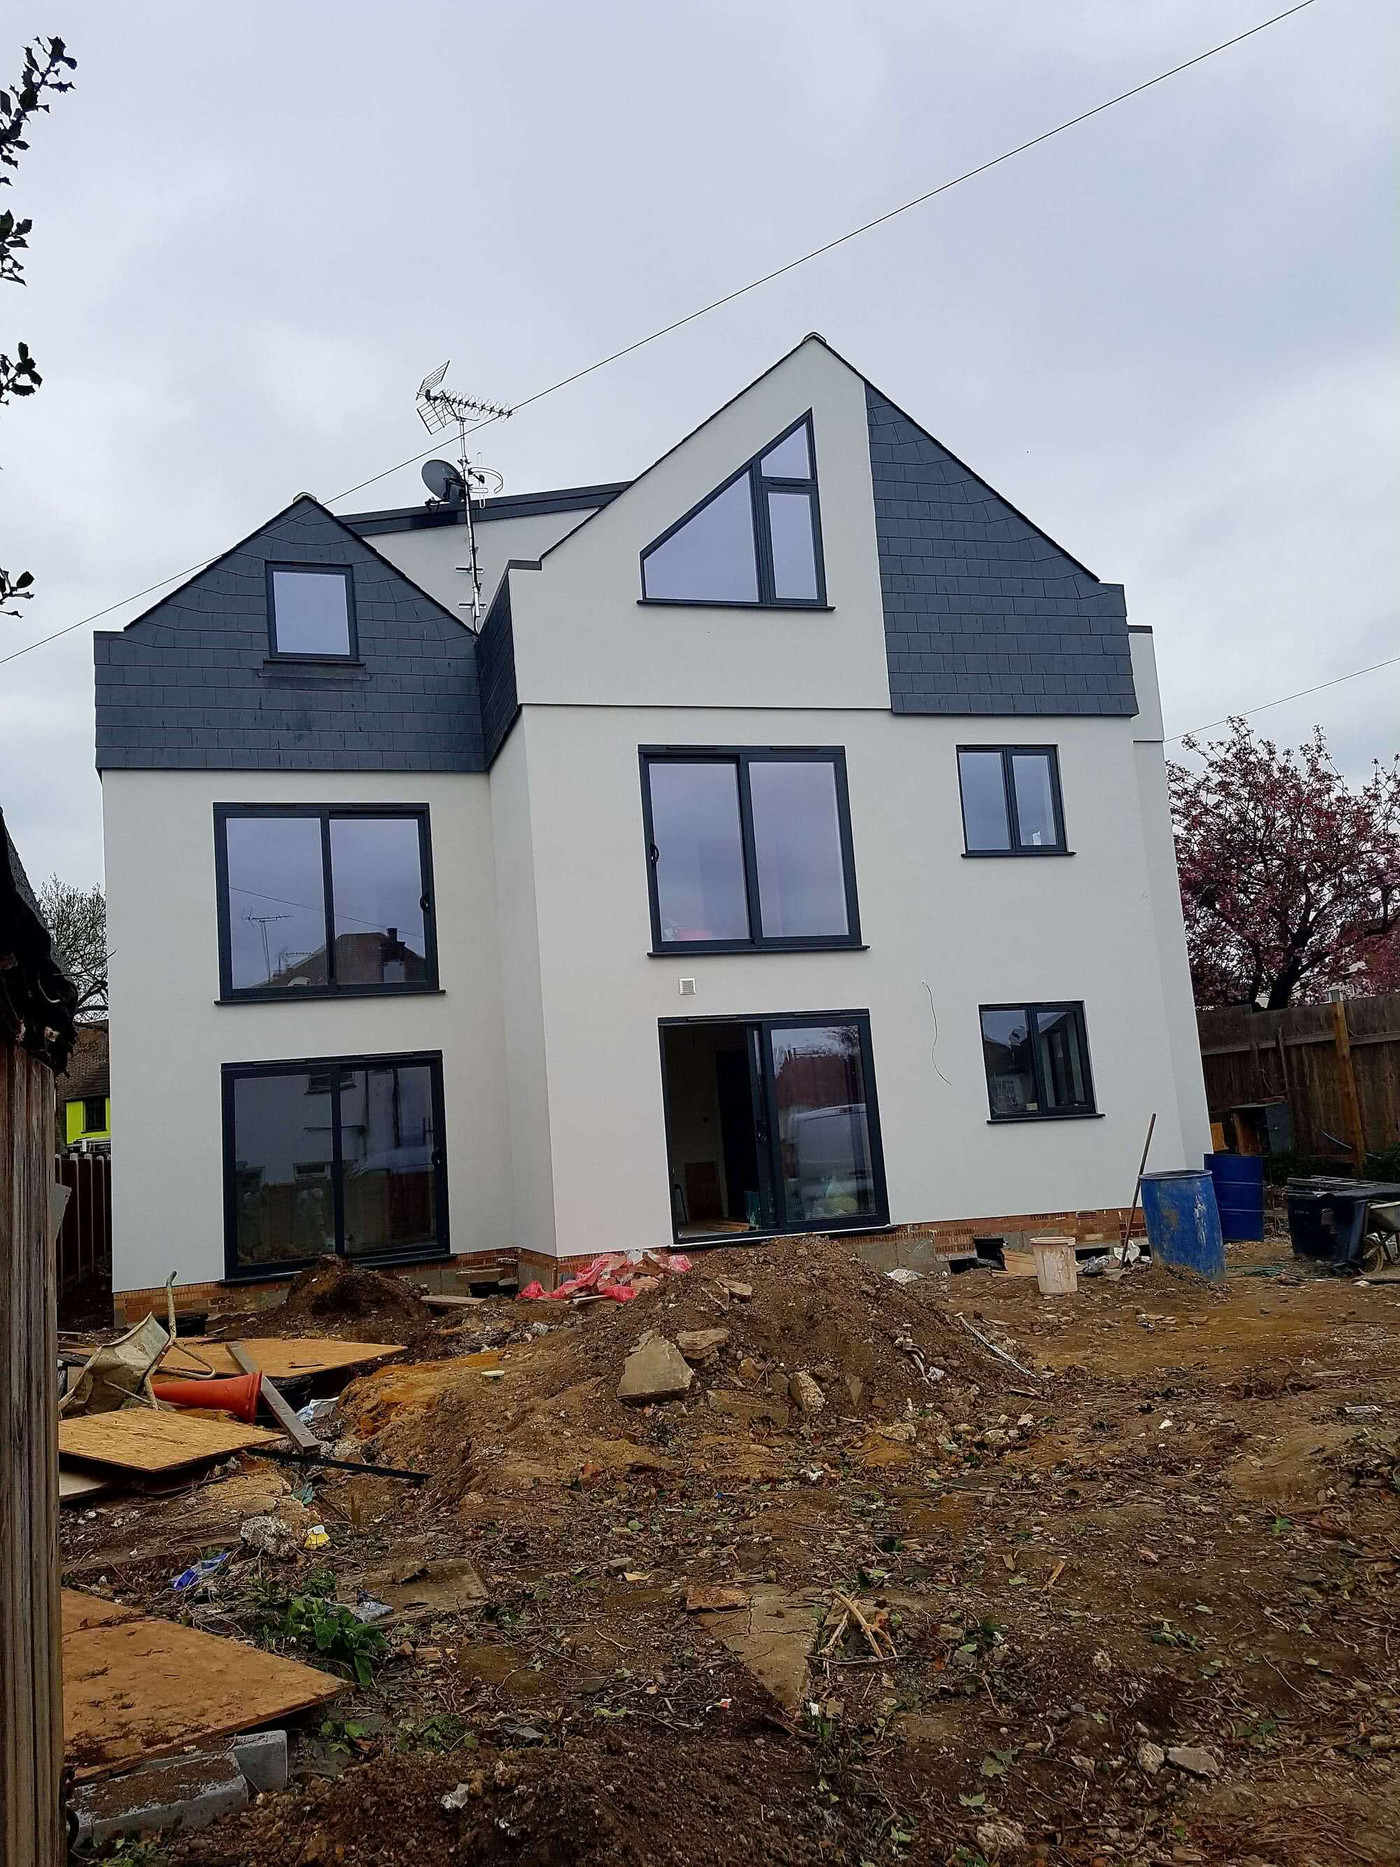 Example of a new build project completed by R. Fulcher & Sons